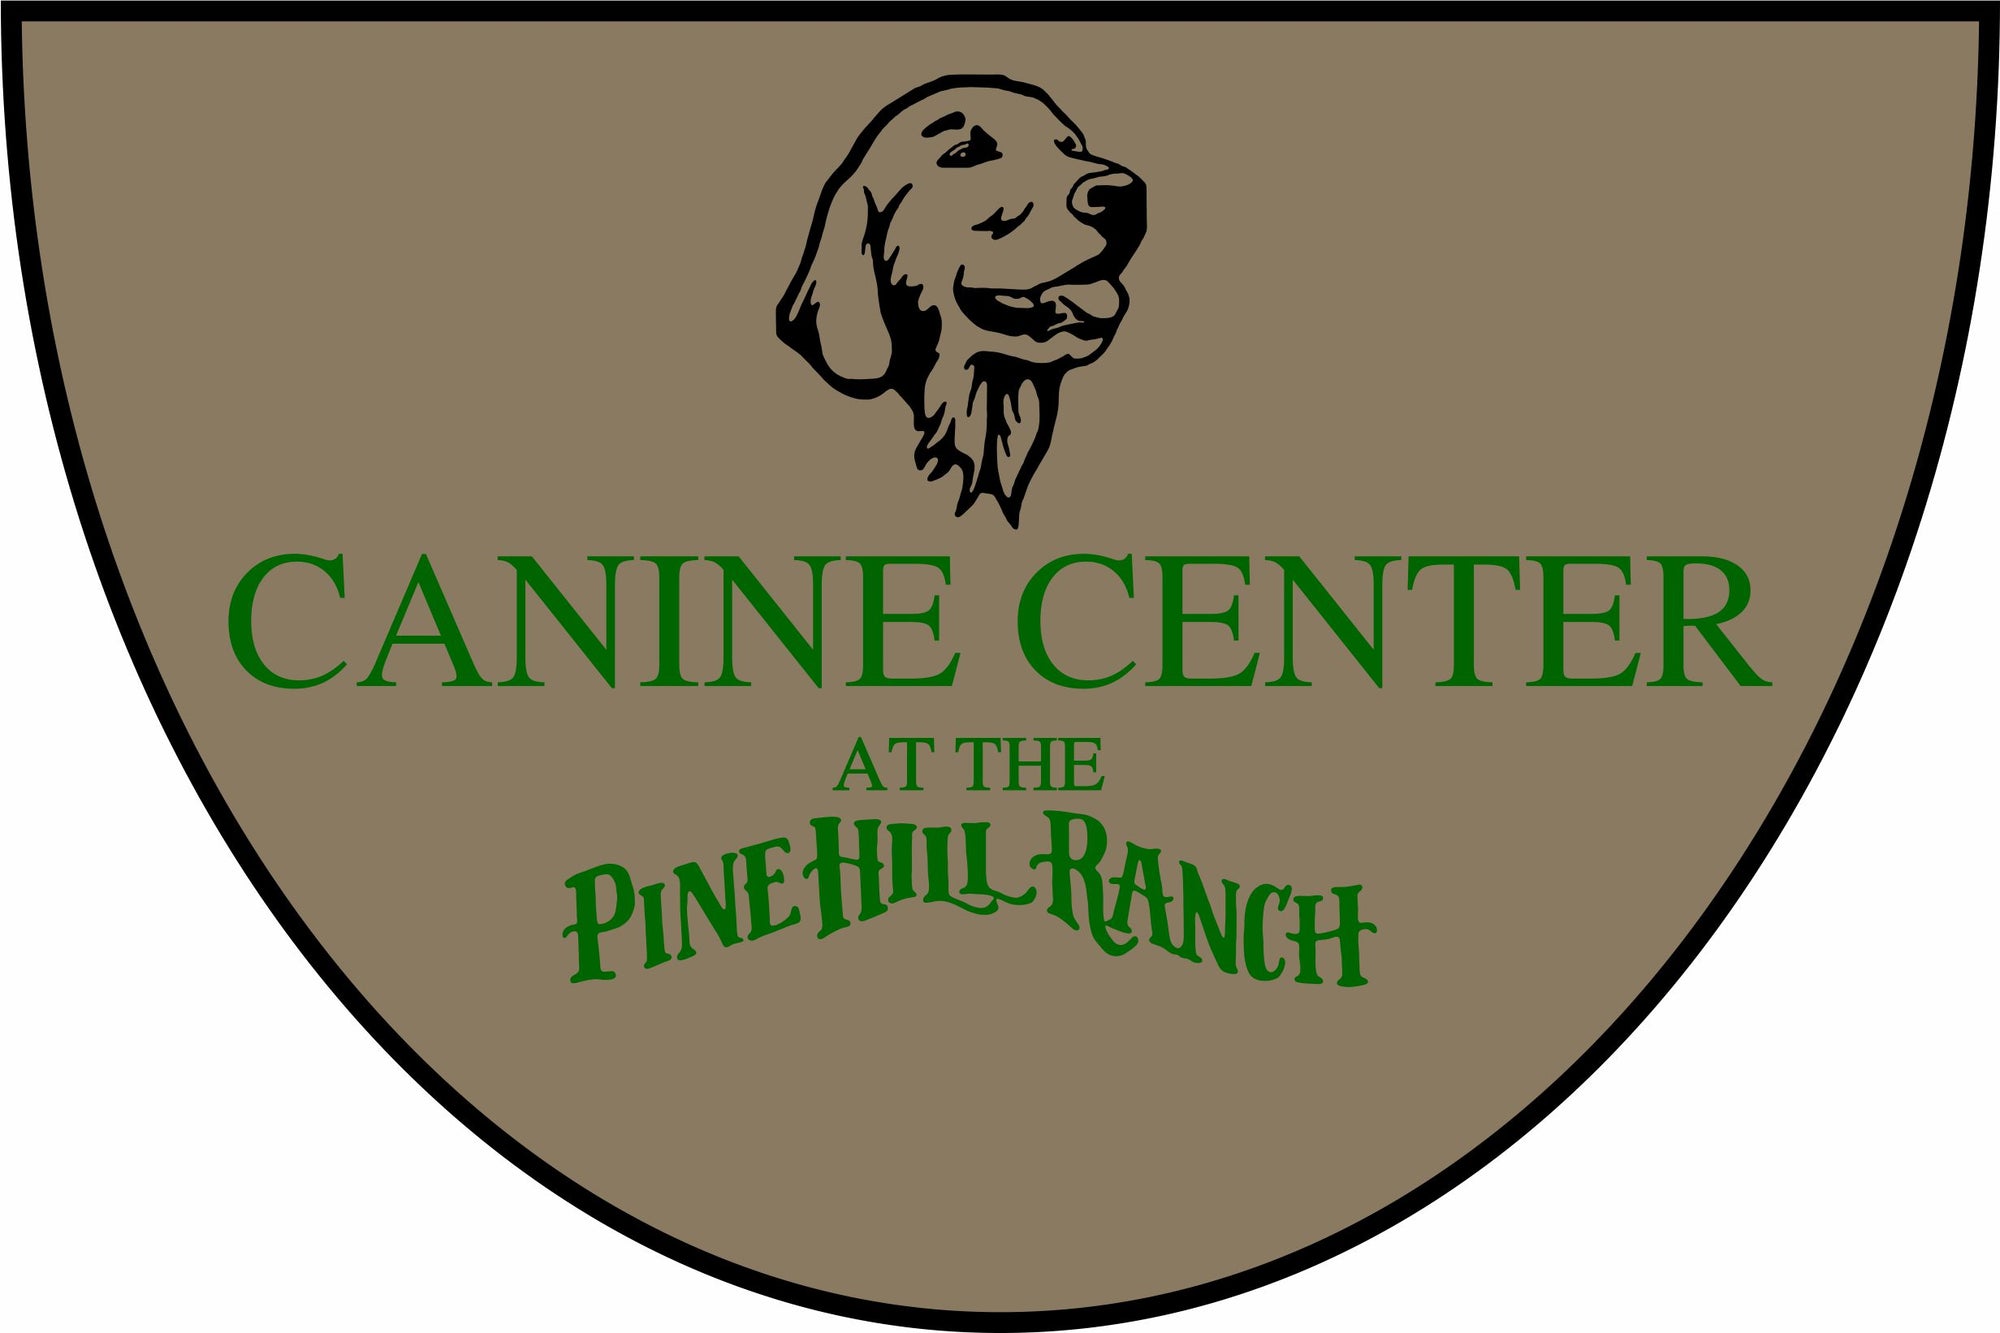 Canine Center at the Pine Hill Ranch §